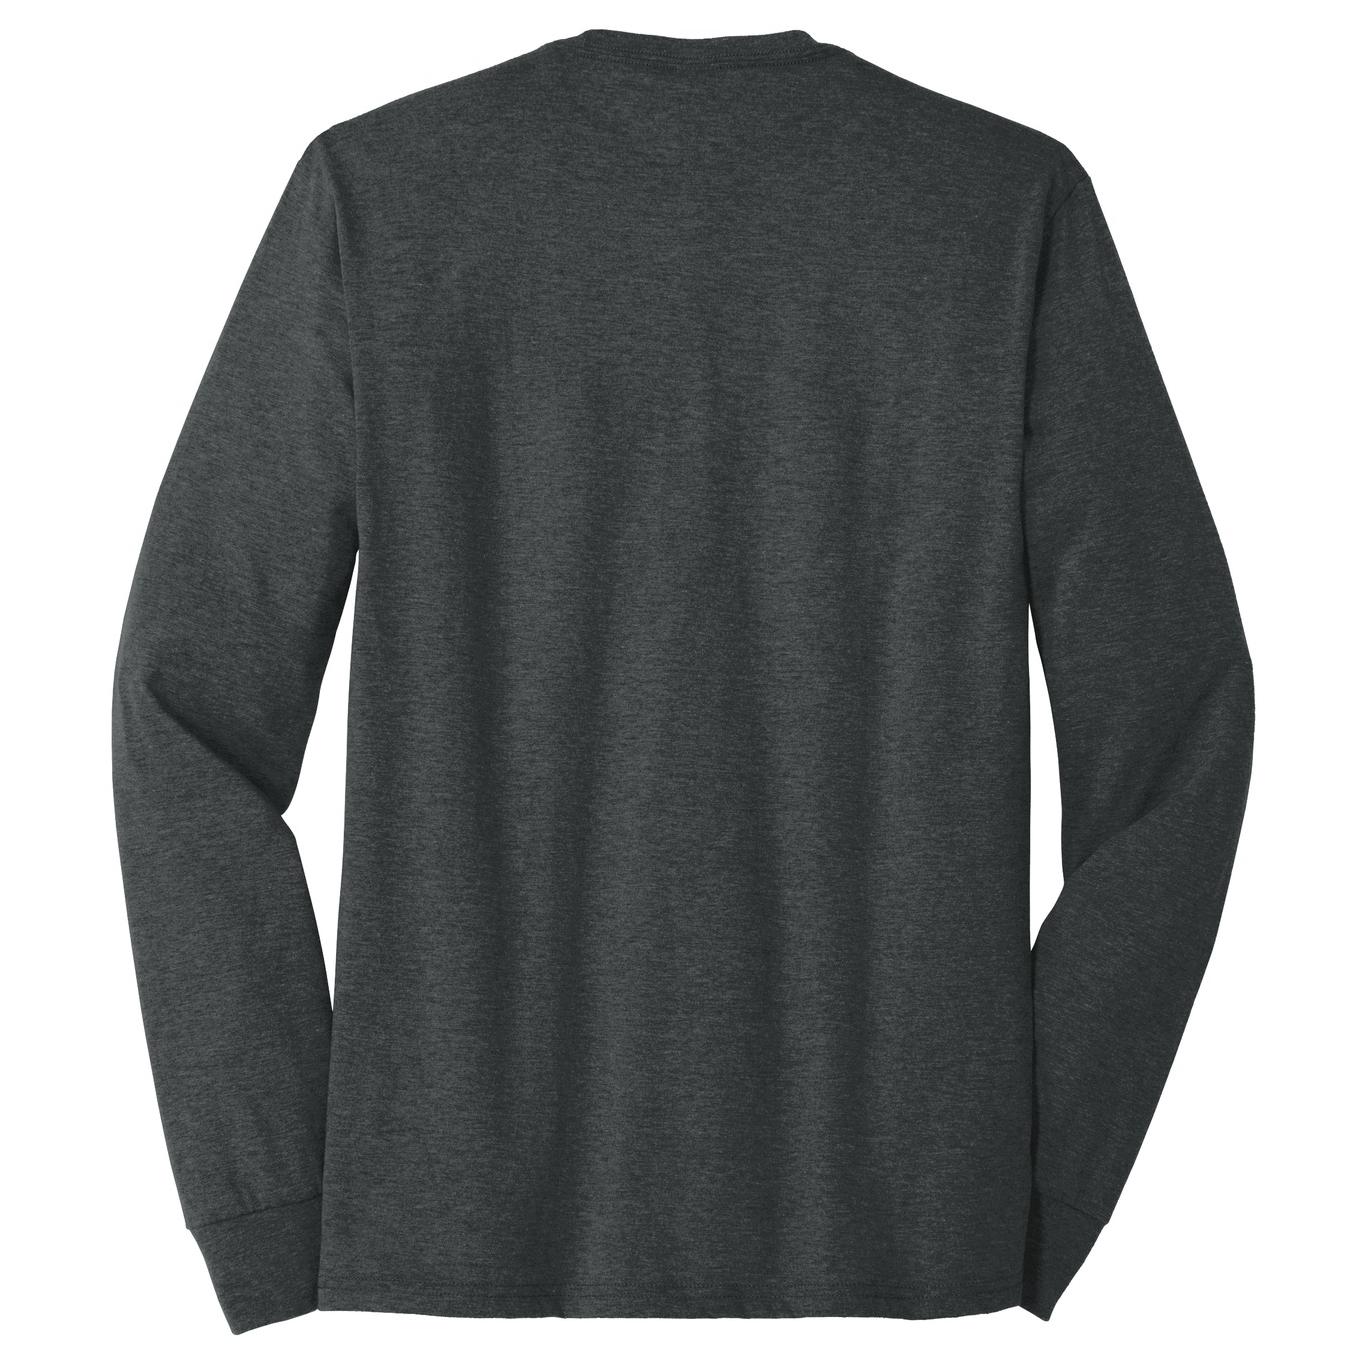 District DM132 Perfect Tri Long Sleeve Tee - Black Frost